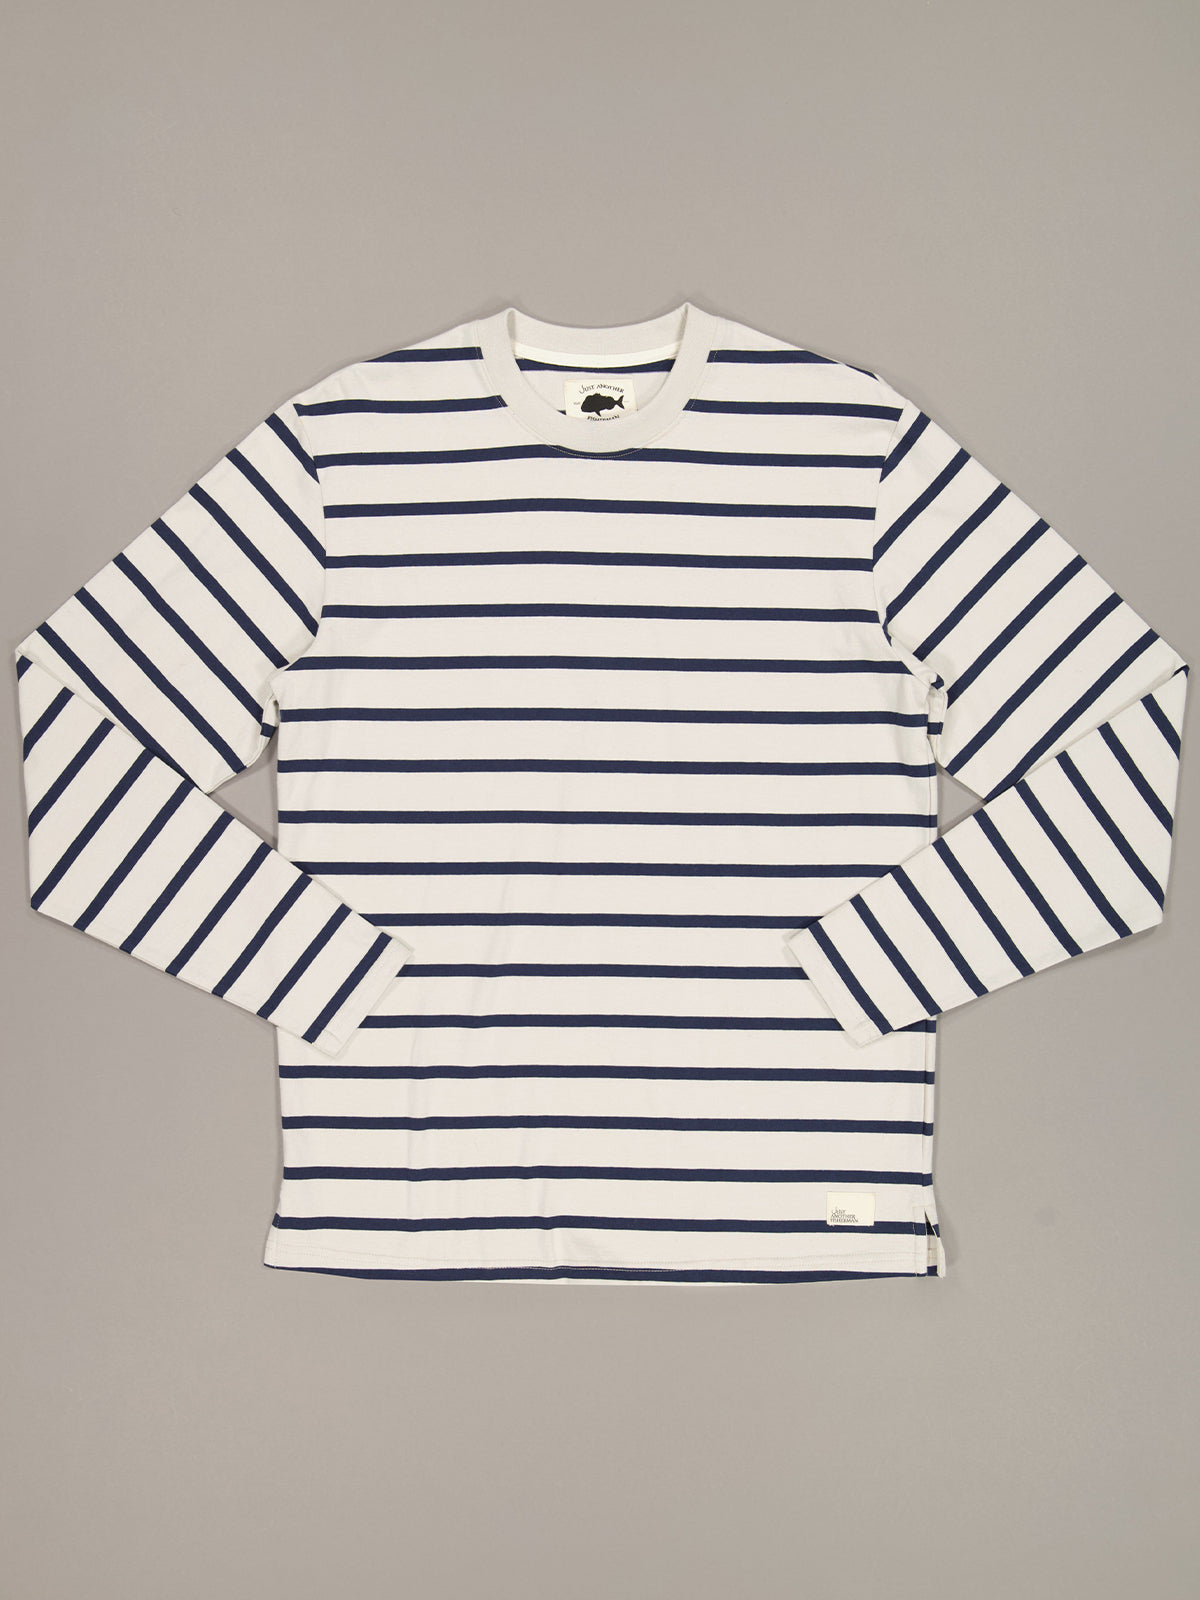 STRIPE SEA LS TEE - OFF WHITE/NAVY STRIPE– Just Another Fisherman